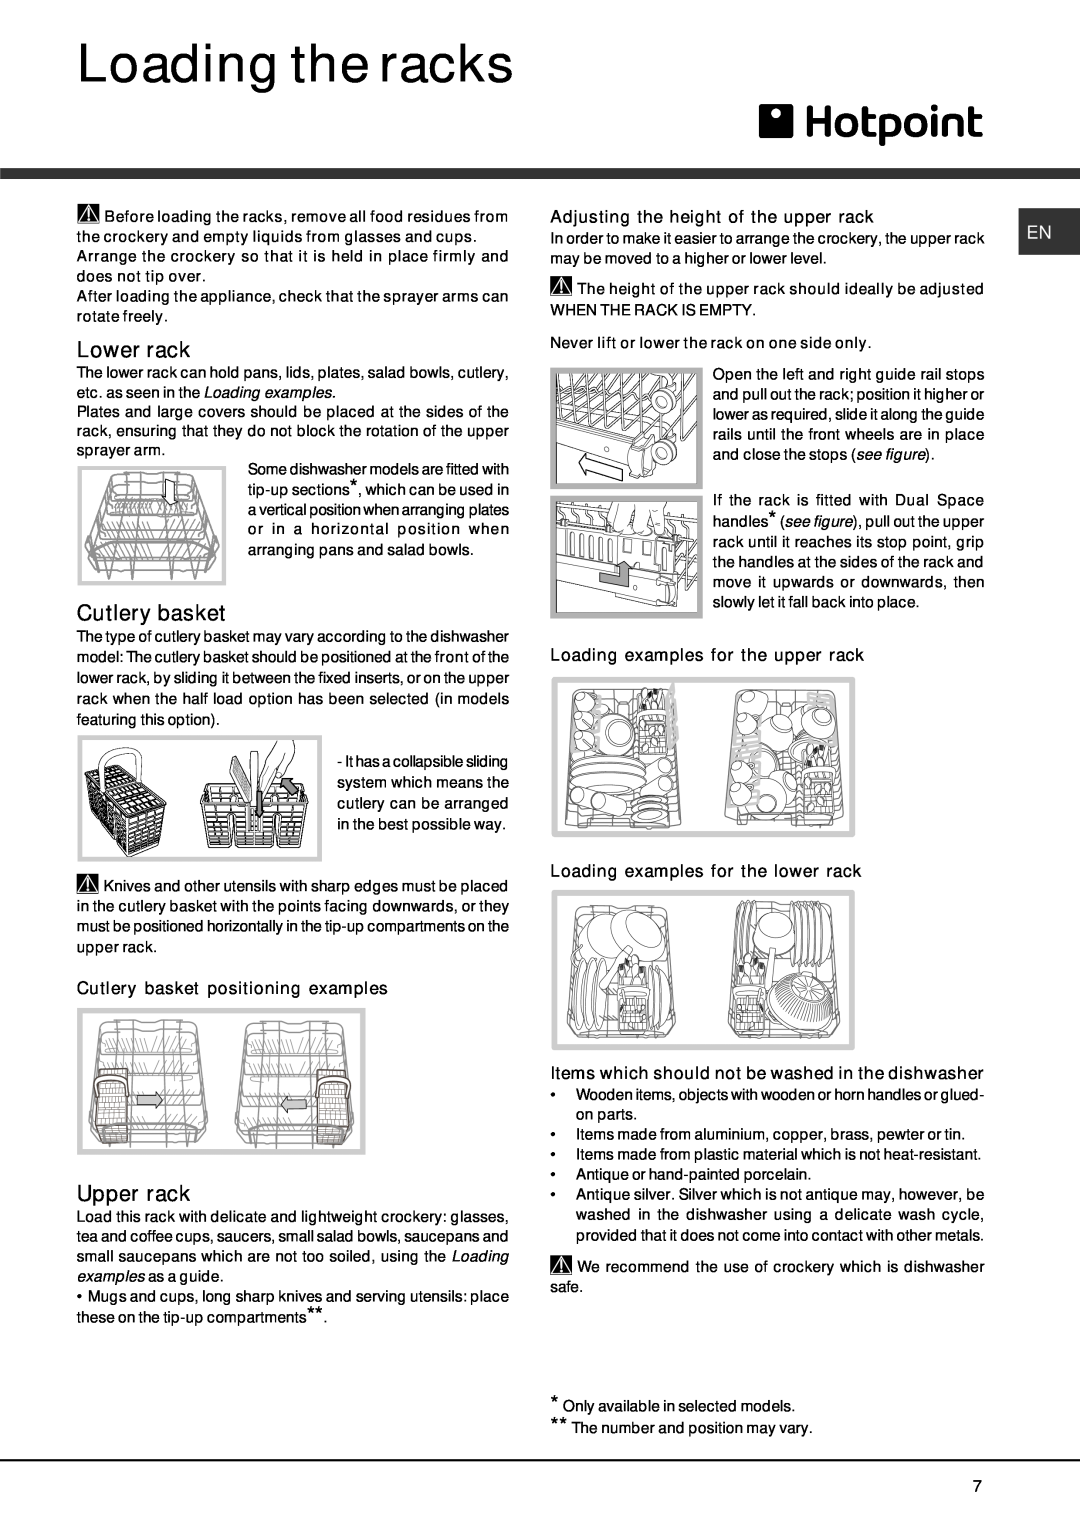 Hotpoint LST 216 manual Loading the racks, Lower rack, Upper rack, Cutlery basket positioning examples 